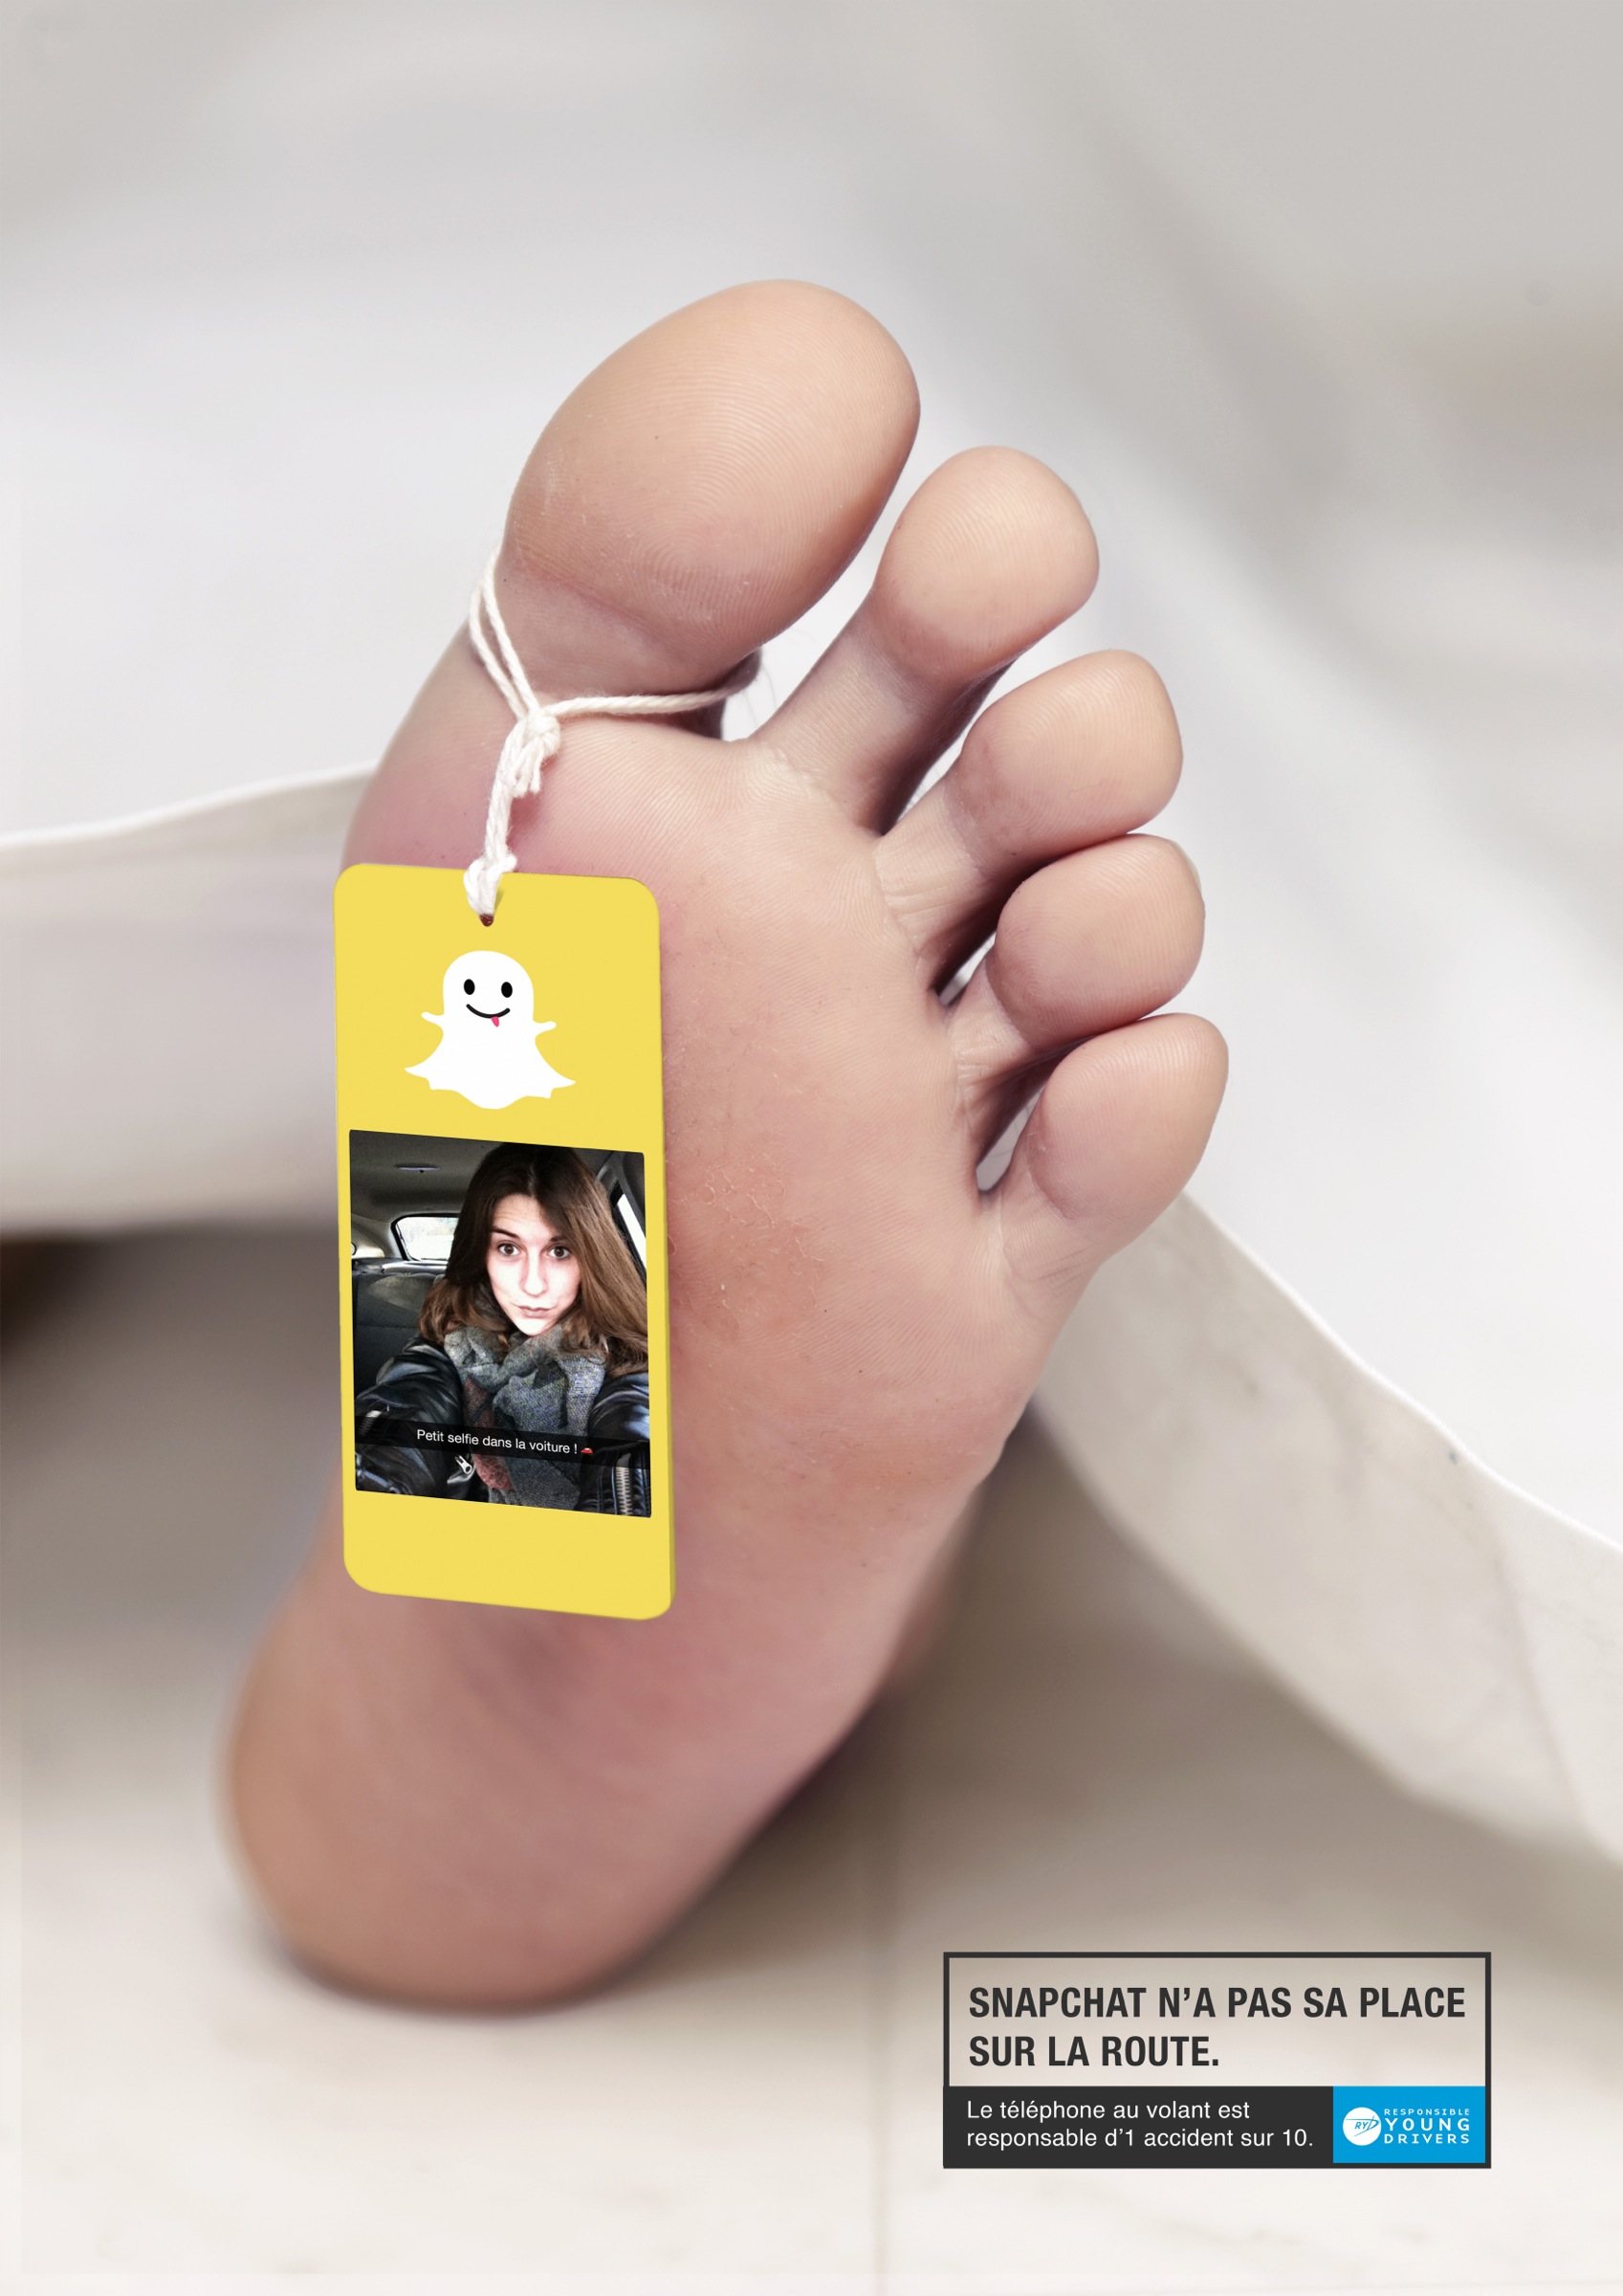 Snapchat: Responsible Young Drivers Panasonic Eluga - A Smartphone that works both ways. Campaigns of the World®